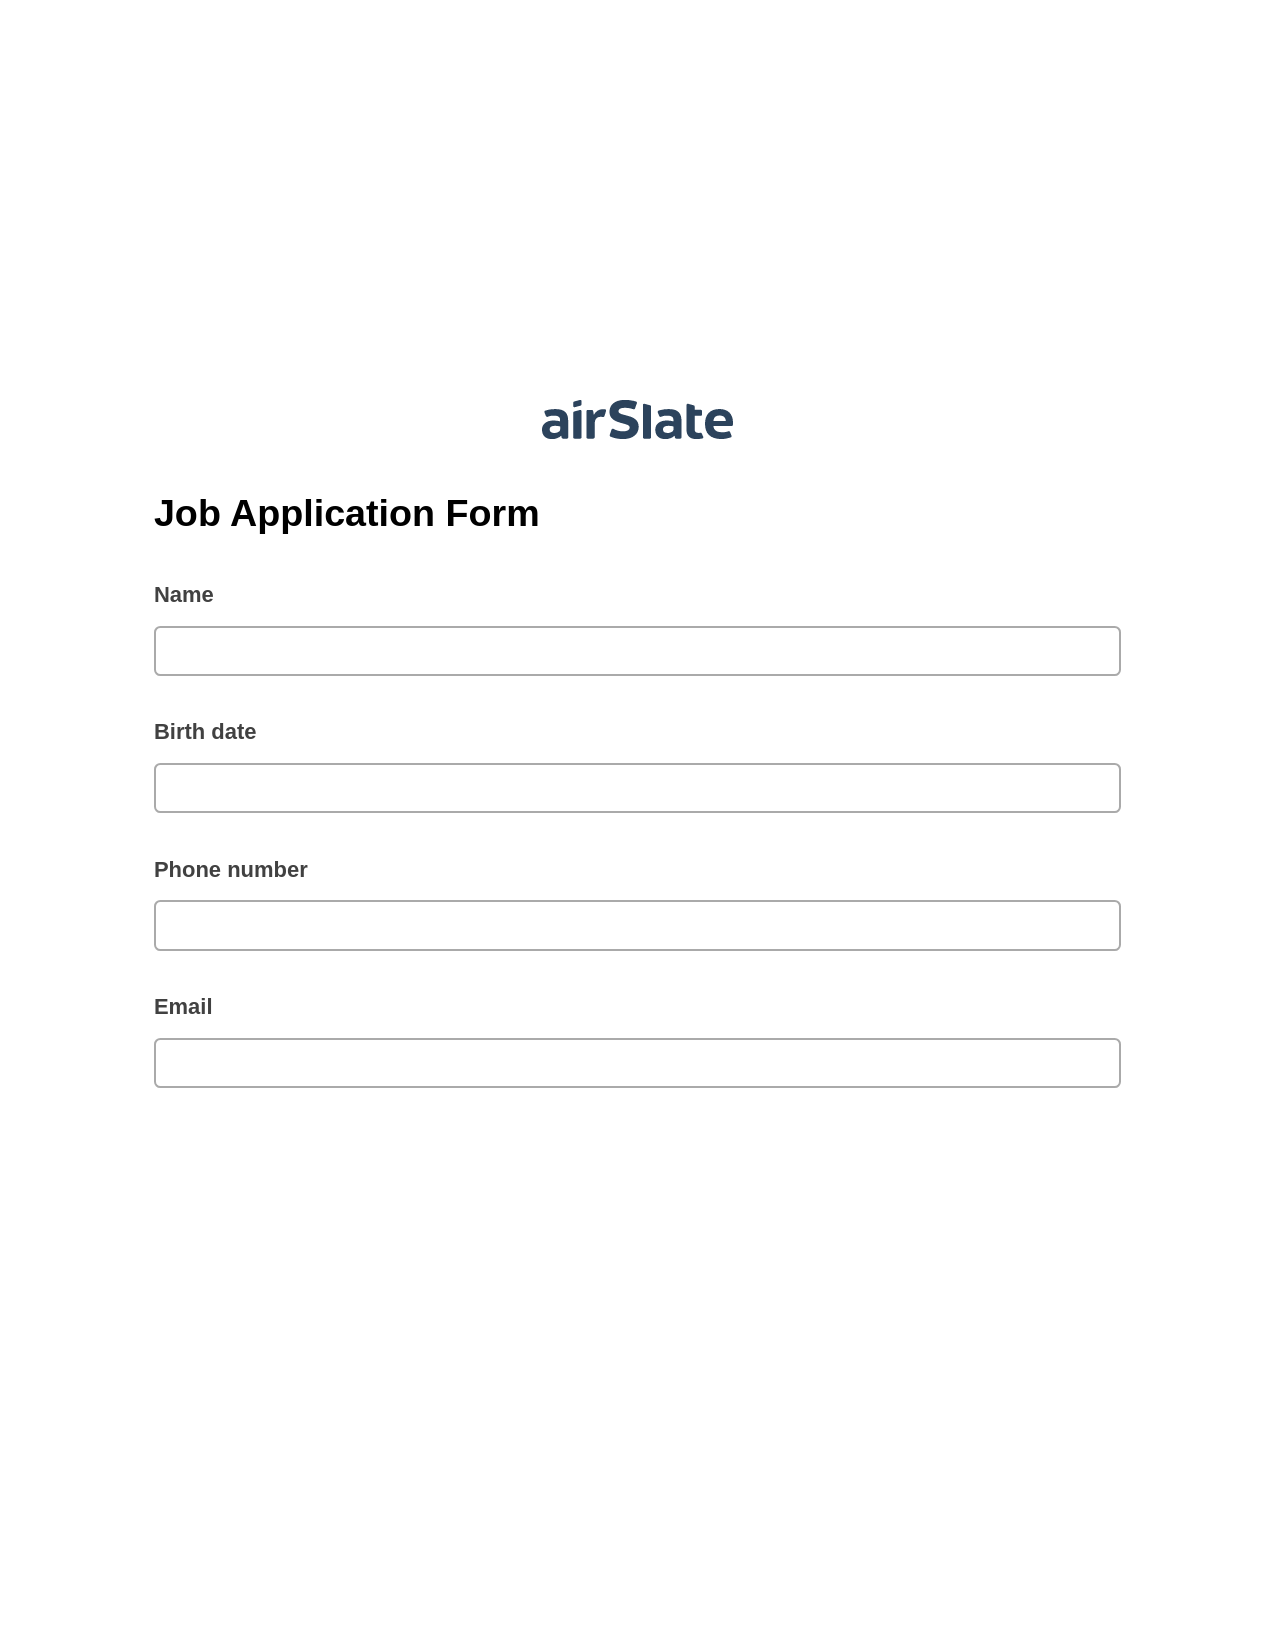 Multirole Job Application Form Pre-fill from another Slate Bot, Update NetSuite Records Bot, Export to Salesforce Bot